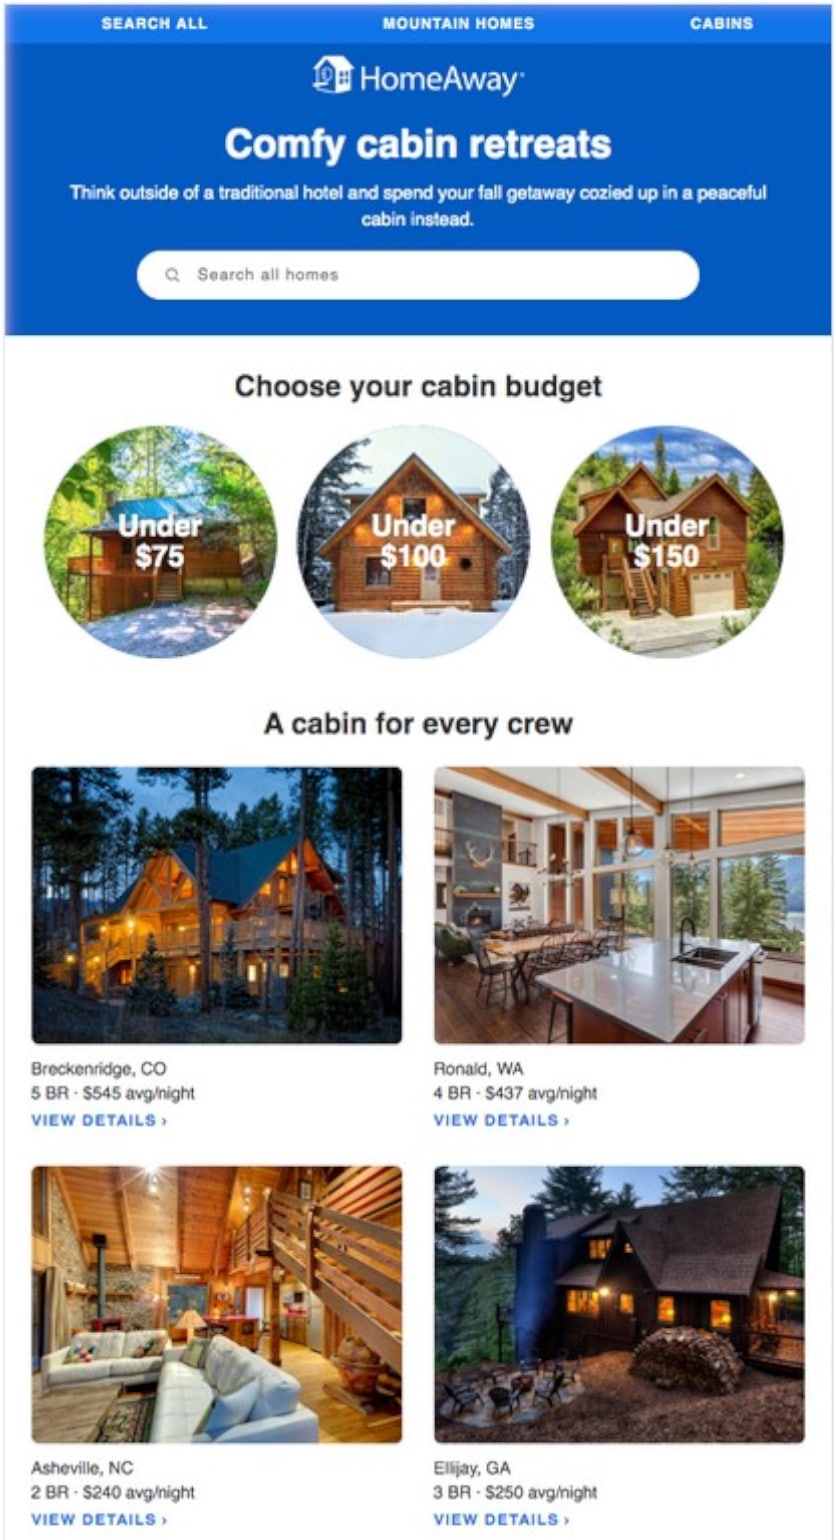 HomeAway embraces mobile optimization to encourage subscribers to engage with them.